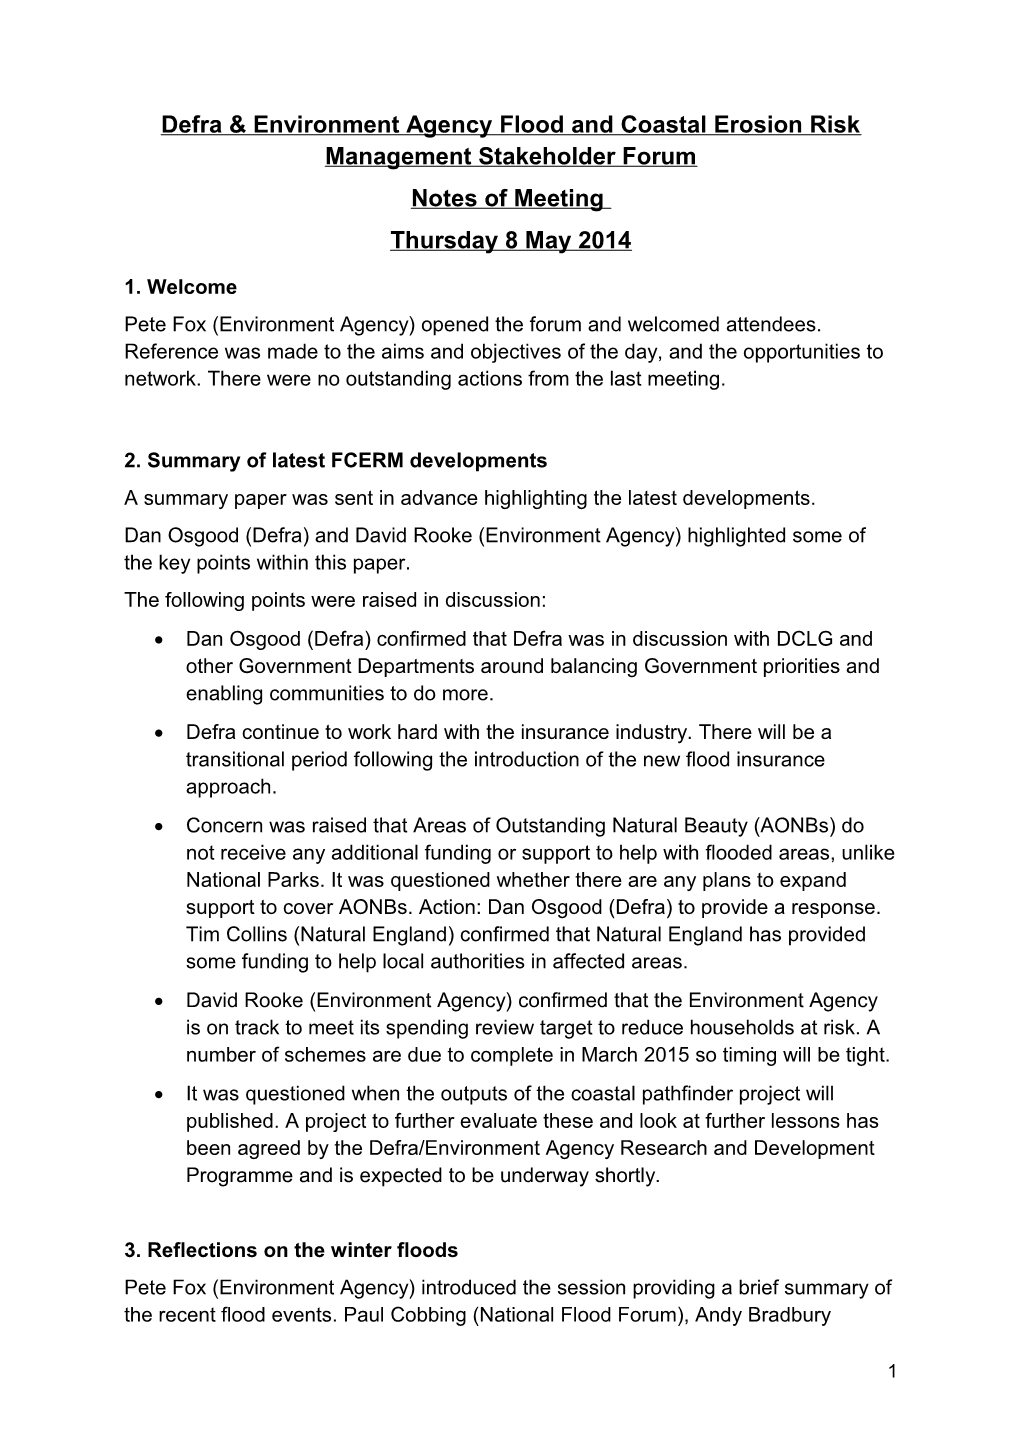 Stakeholder Meeting Notes 10Th May 2011